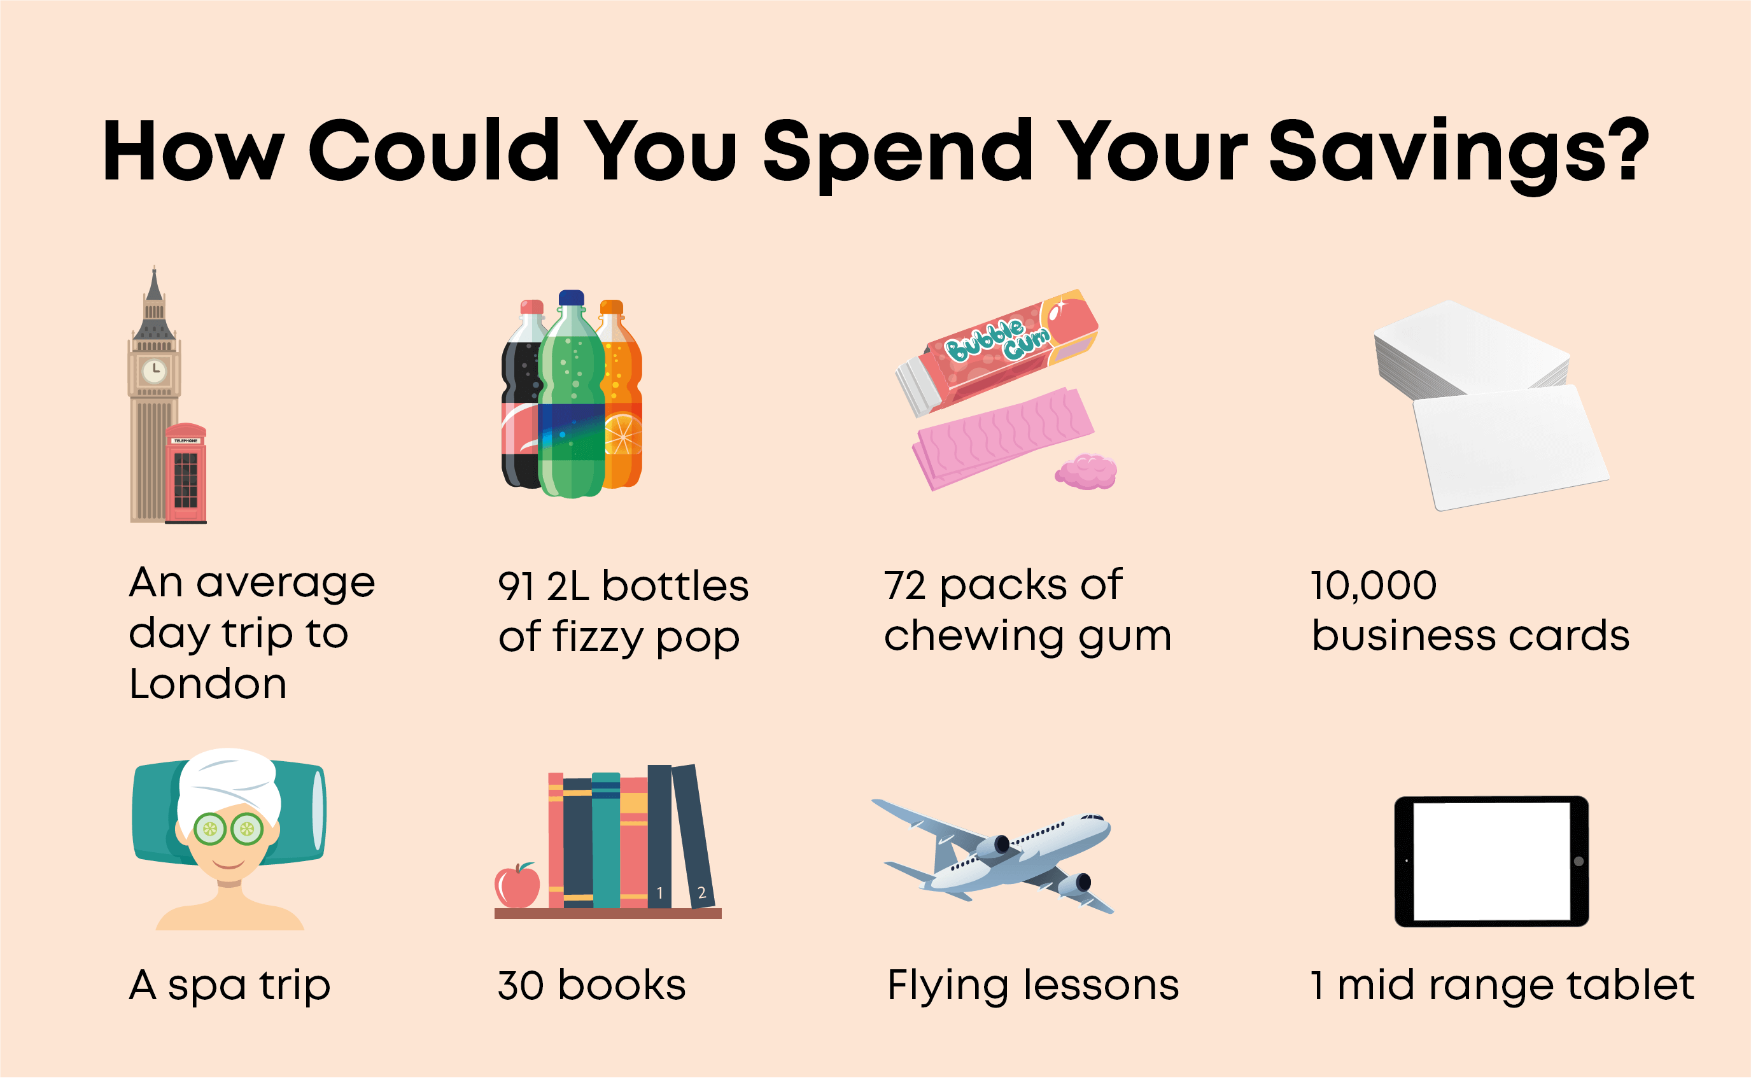 infographic showing different ways to spend £182